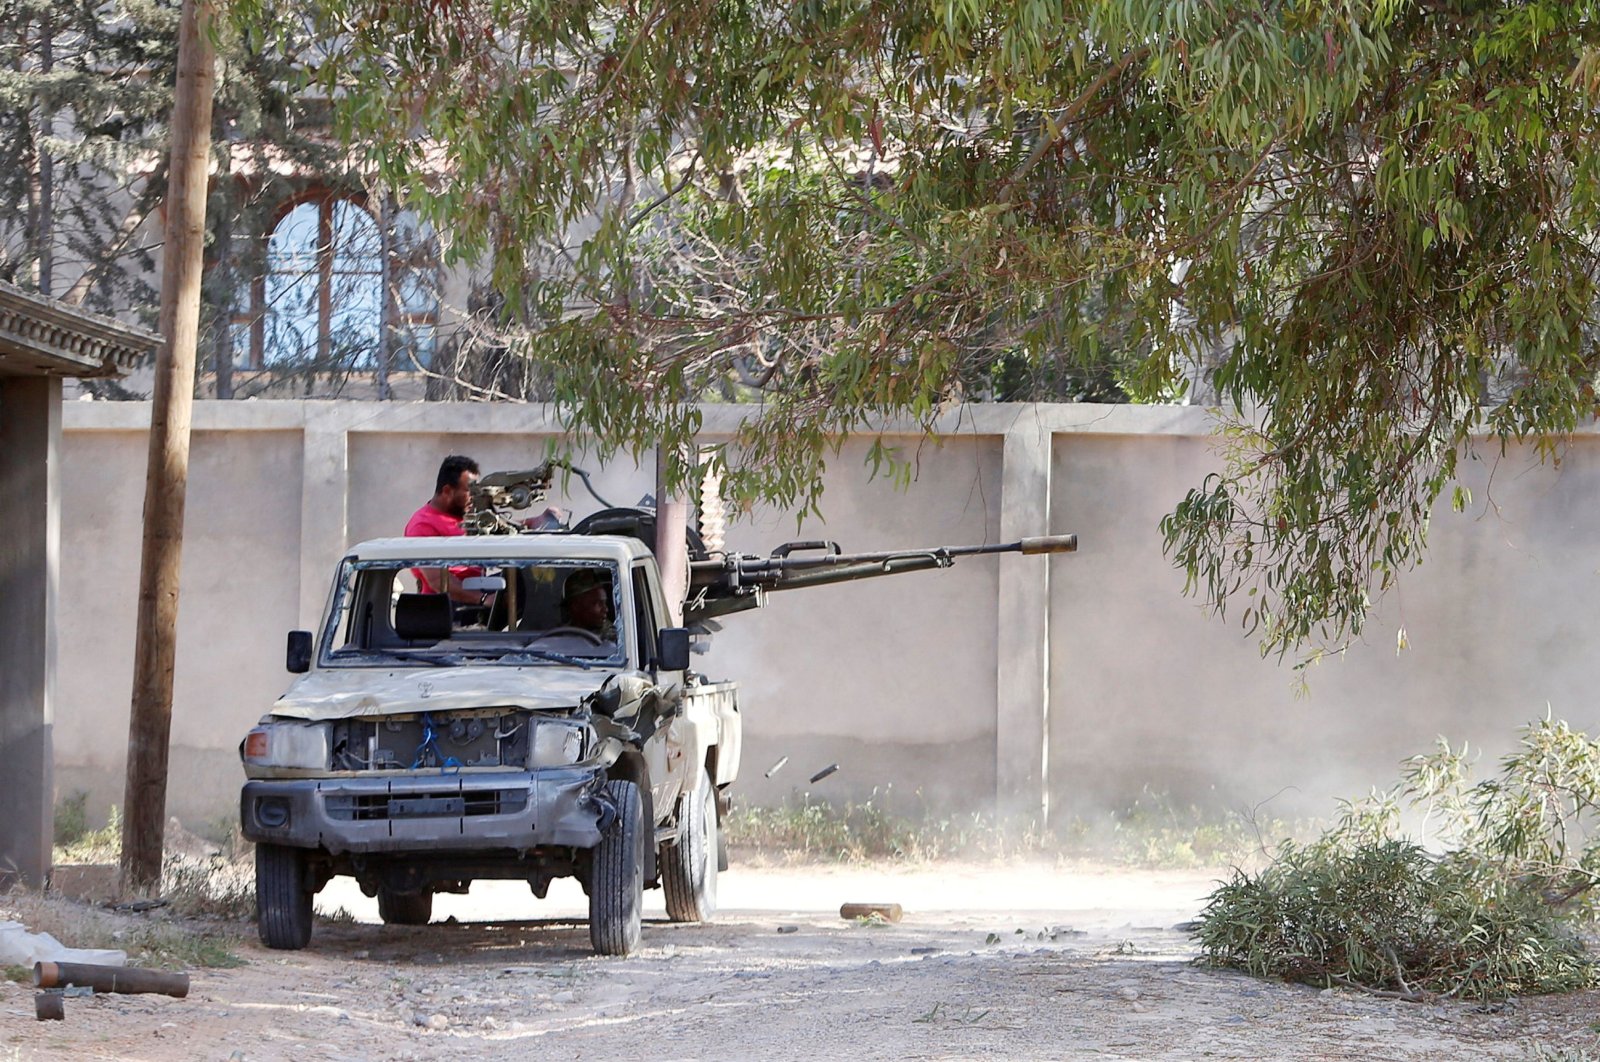 Members of the Libyan internationally recognized government forces fire during a fight with Eastern forces in Ain Zara, Tripoli, Libya, April 28, 2019. (REUTERS Photo)